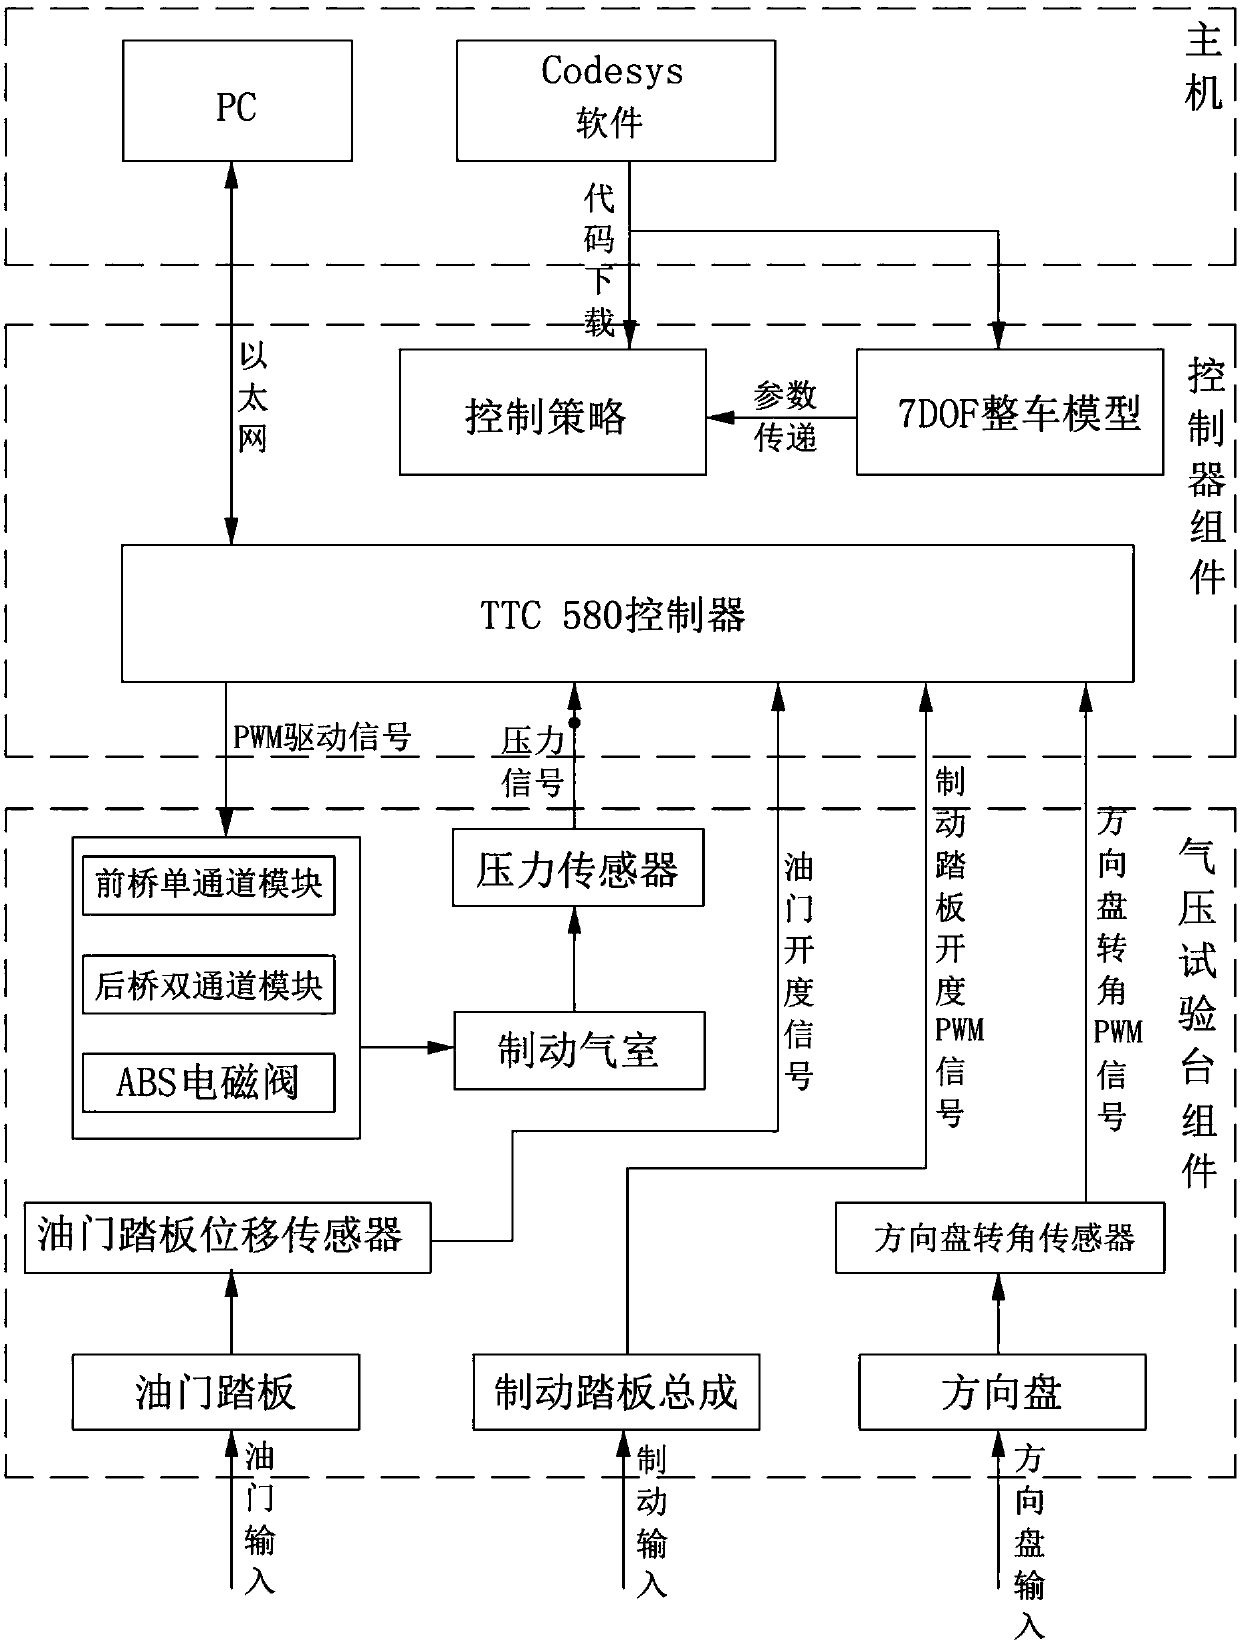 Hardware-in-the-loop test bench and test method for electronic brake system of commercial vehicle based on TTC580 controller